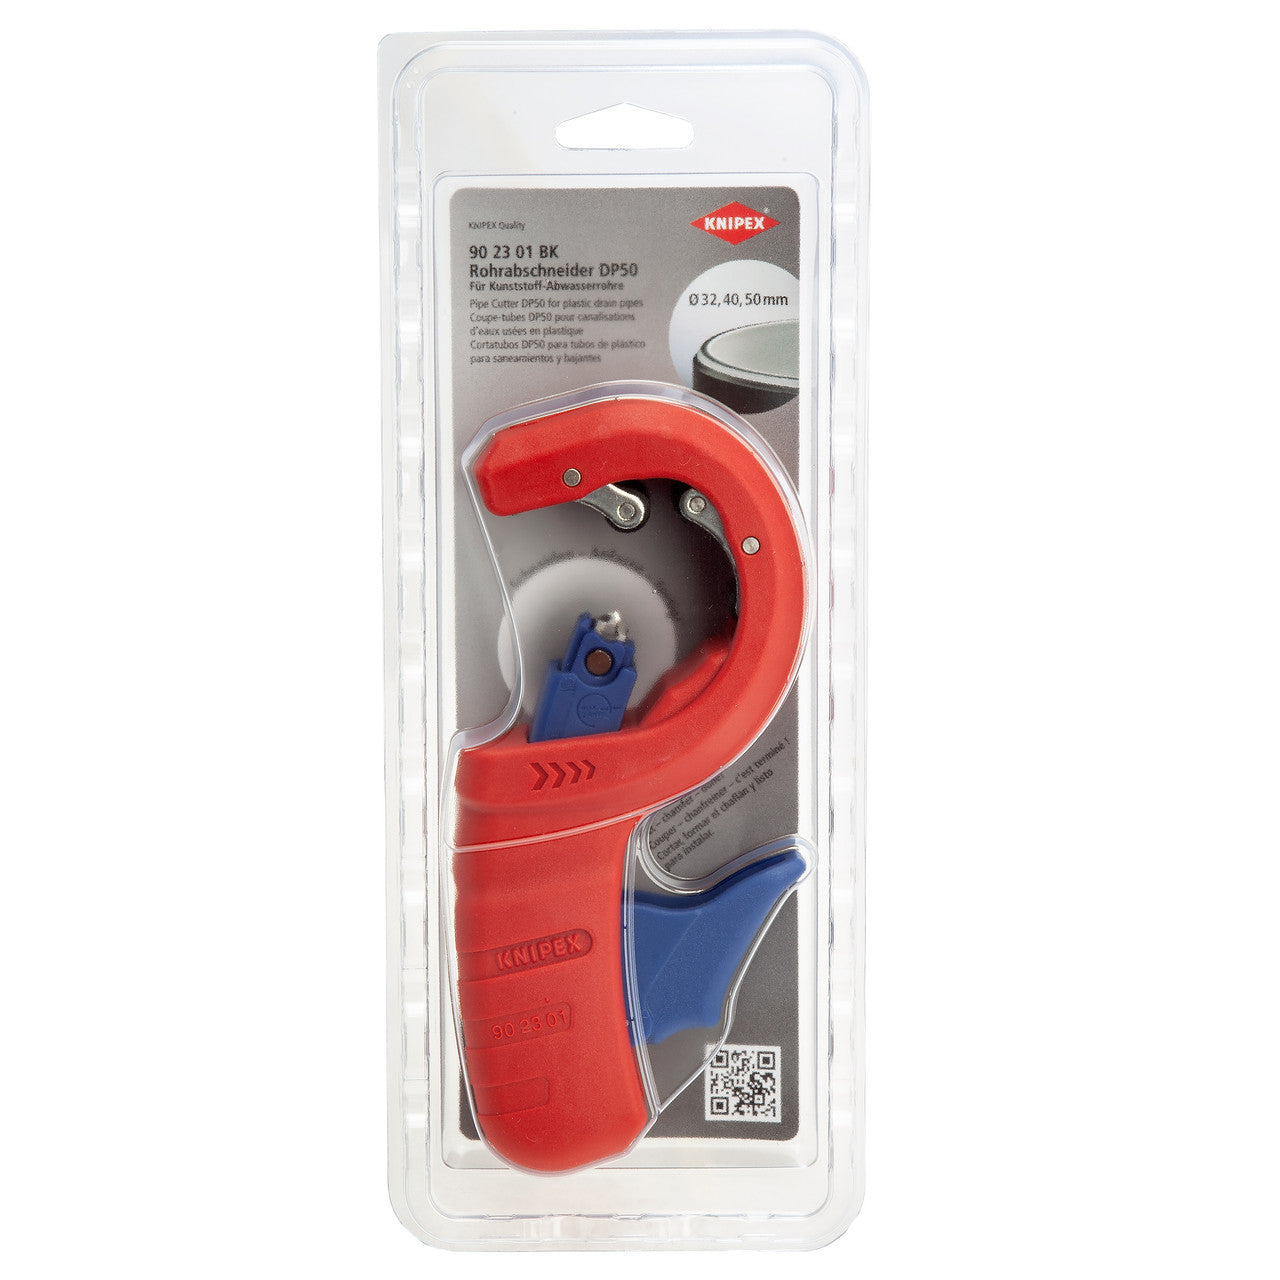 Knipex 902301BK DP50 Cutter for Plastic Drain Pipes